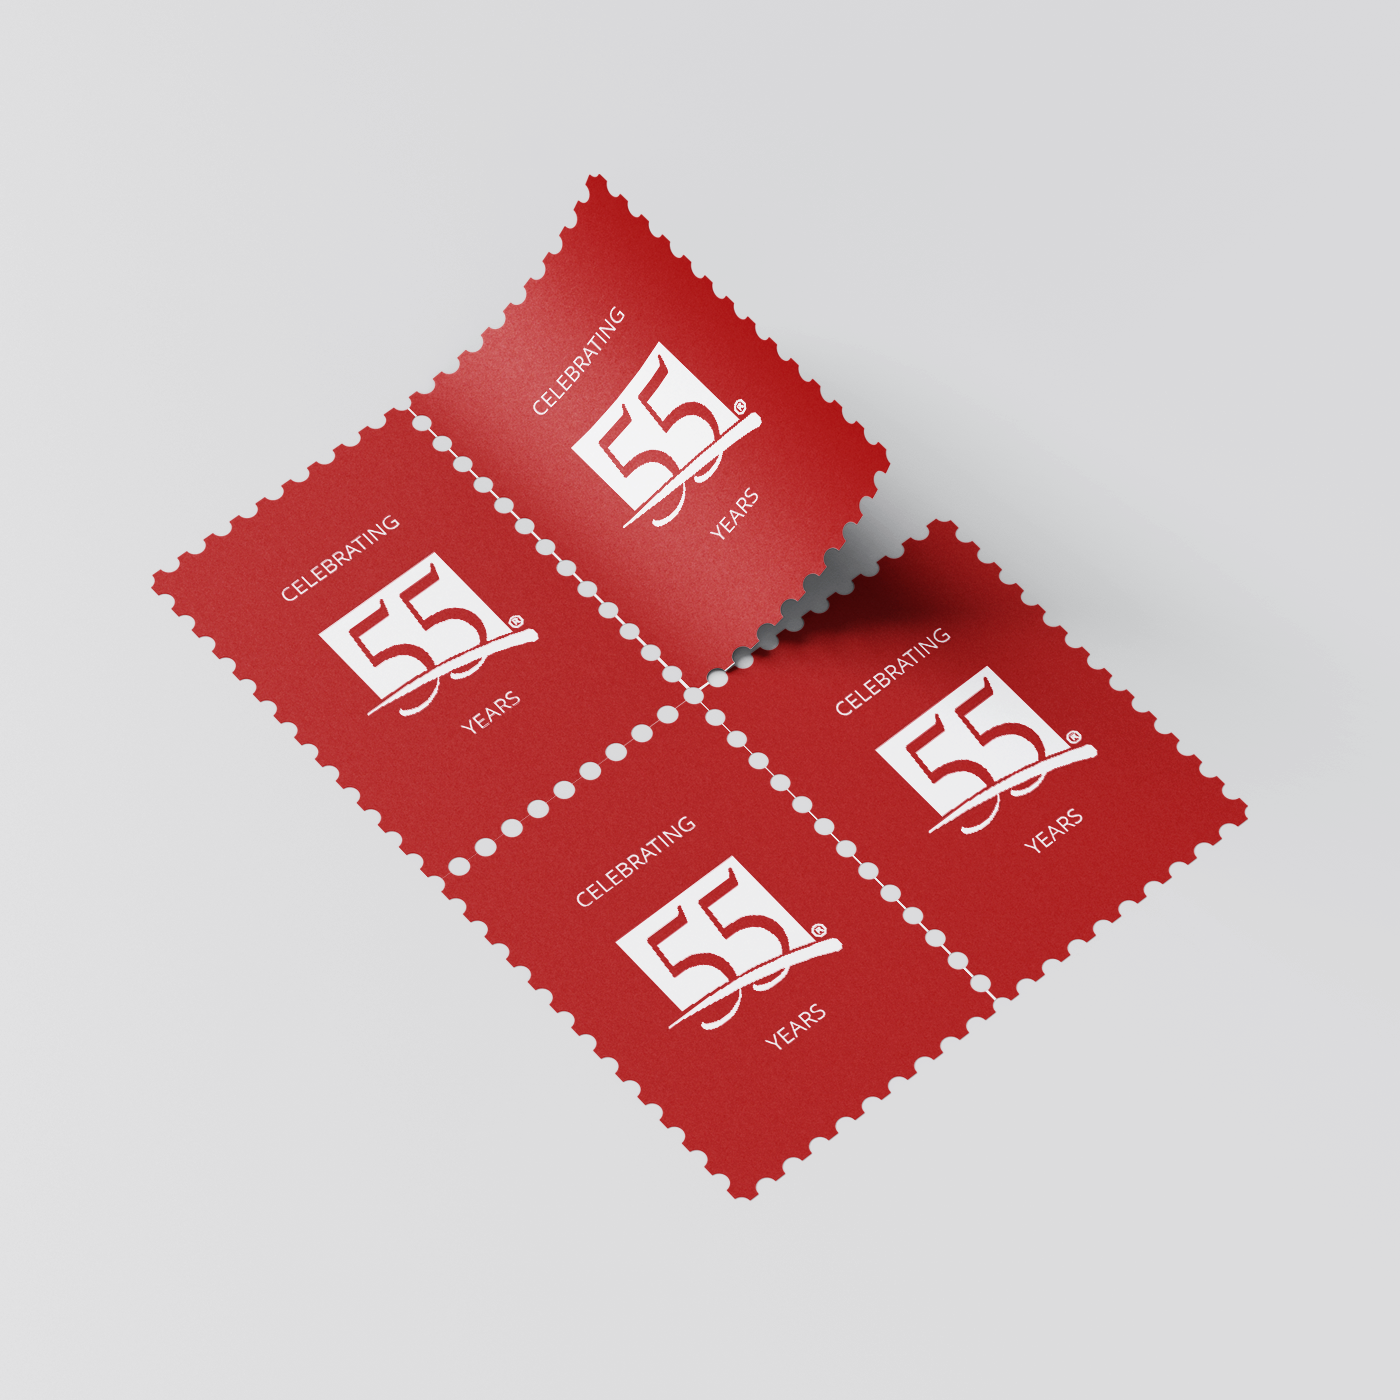 Red stamps with celebratory anniversary logo of a home and build company.